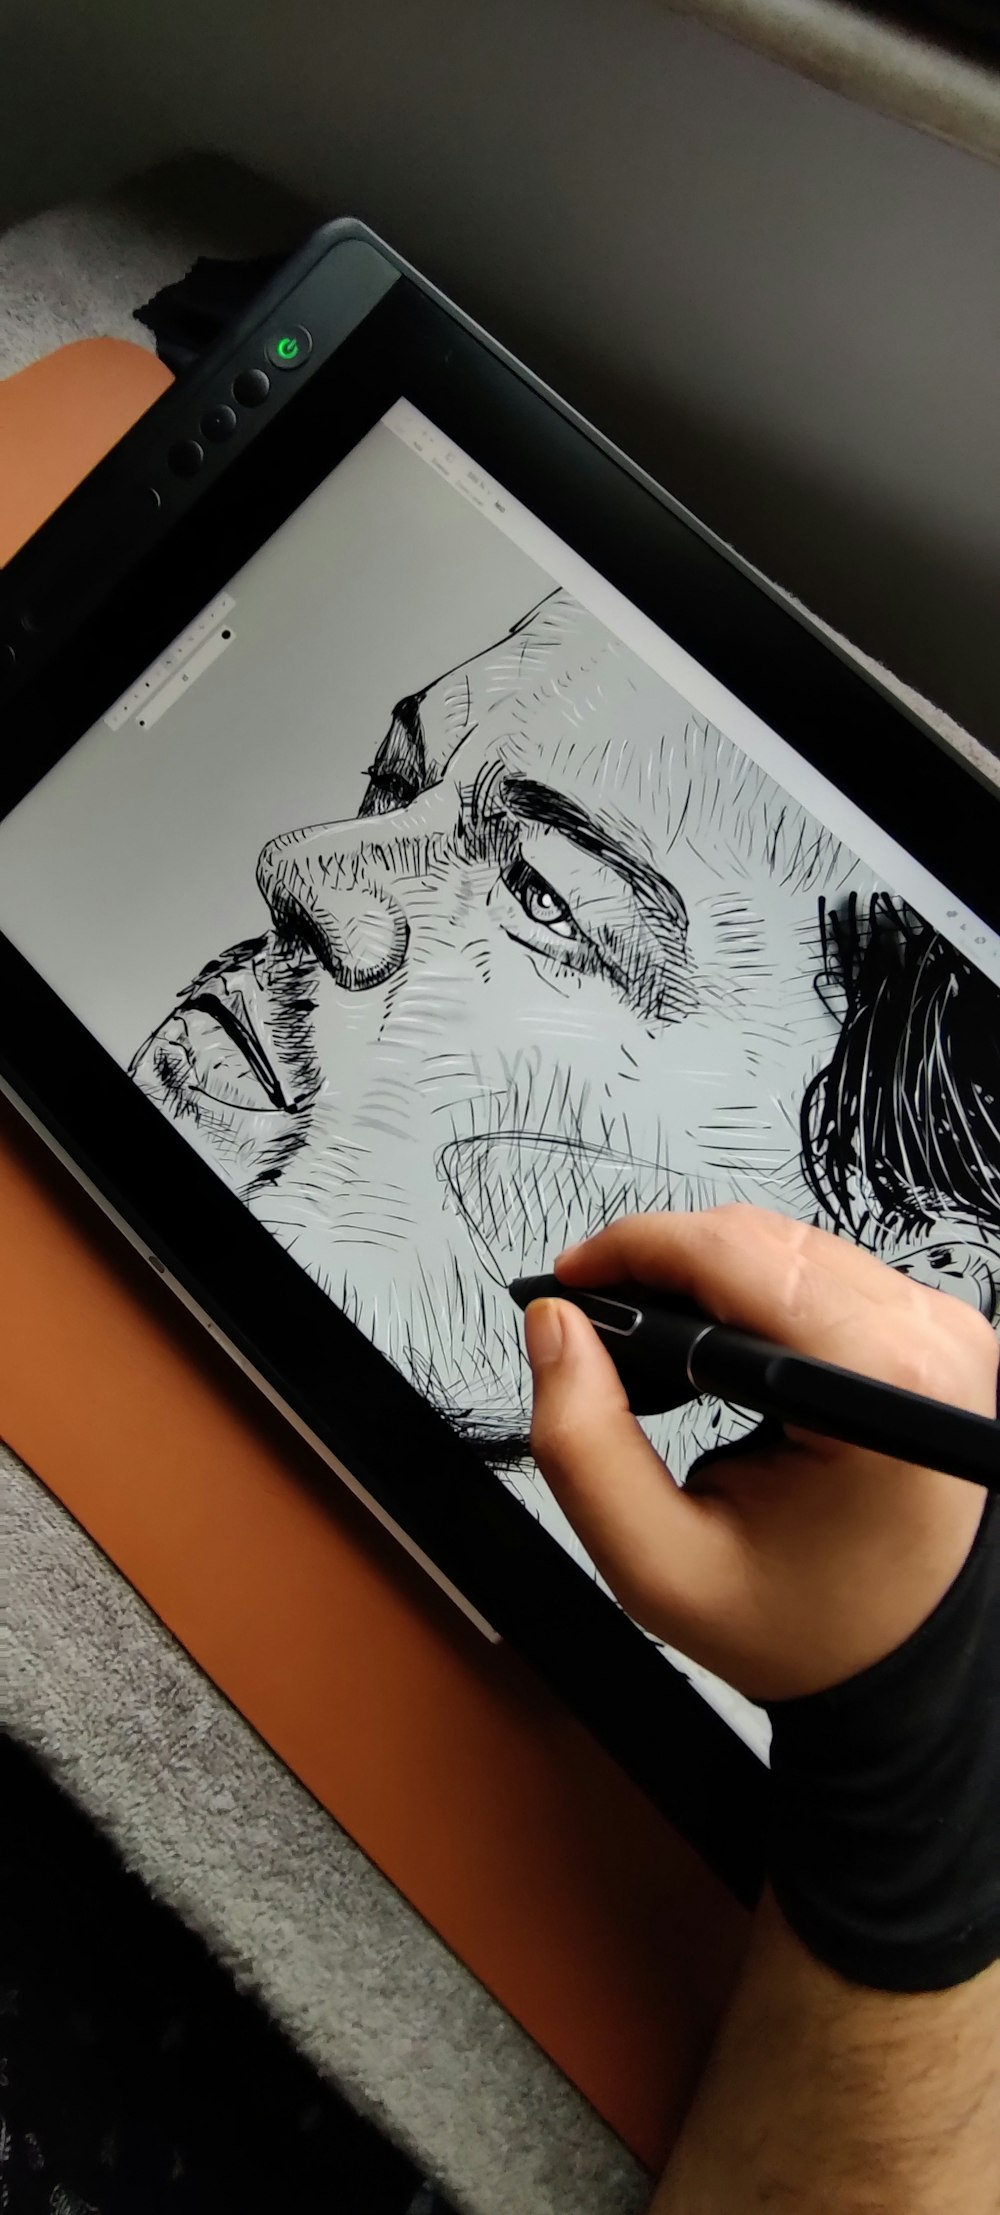 a person is drawing on a tablet with a pen